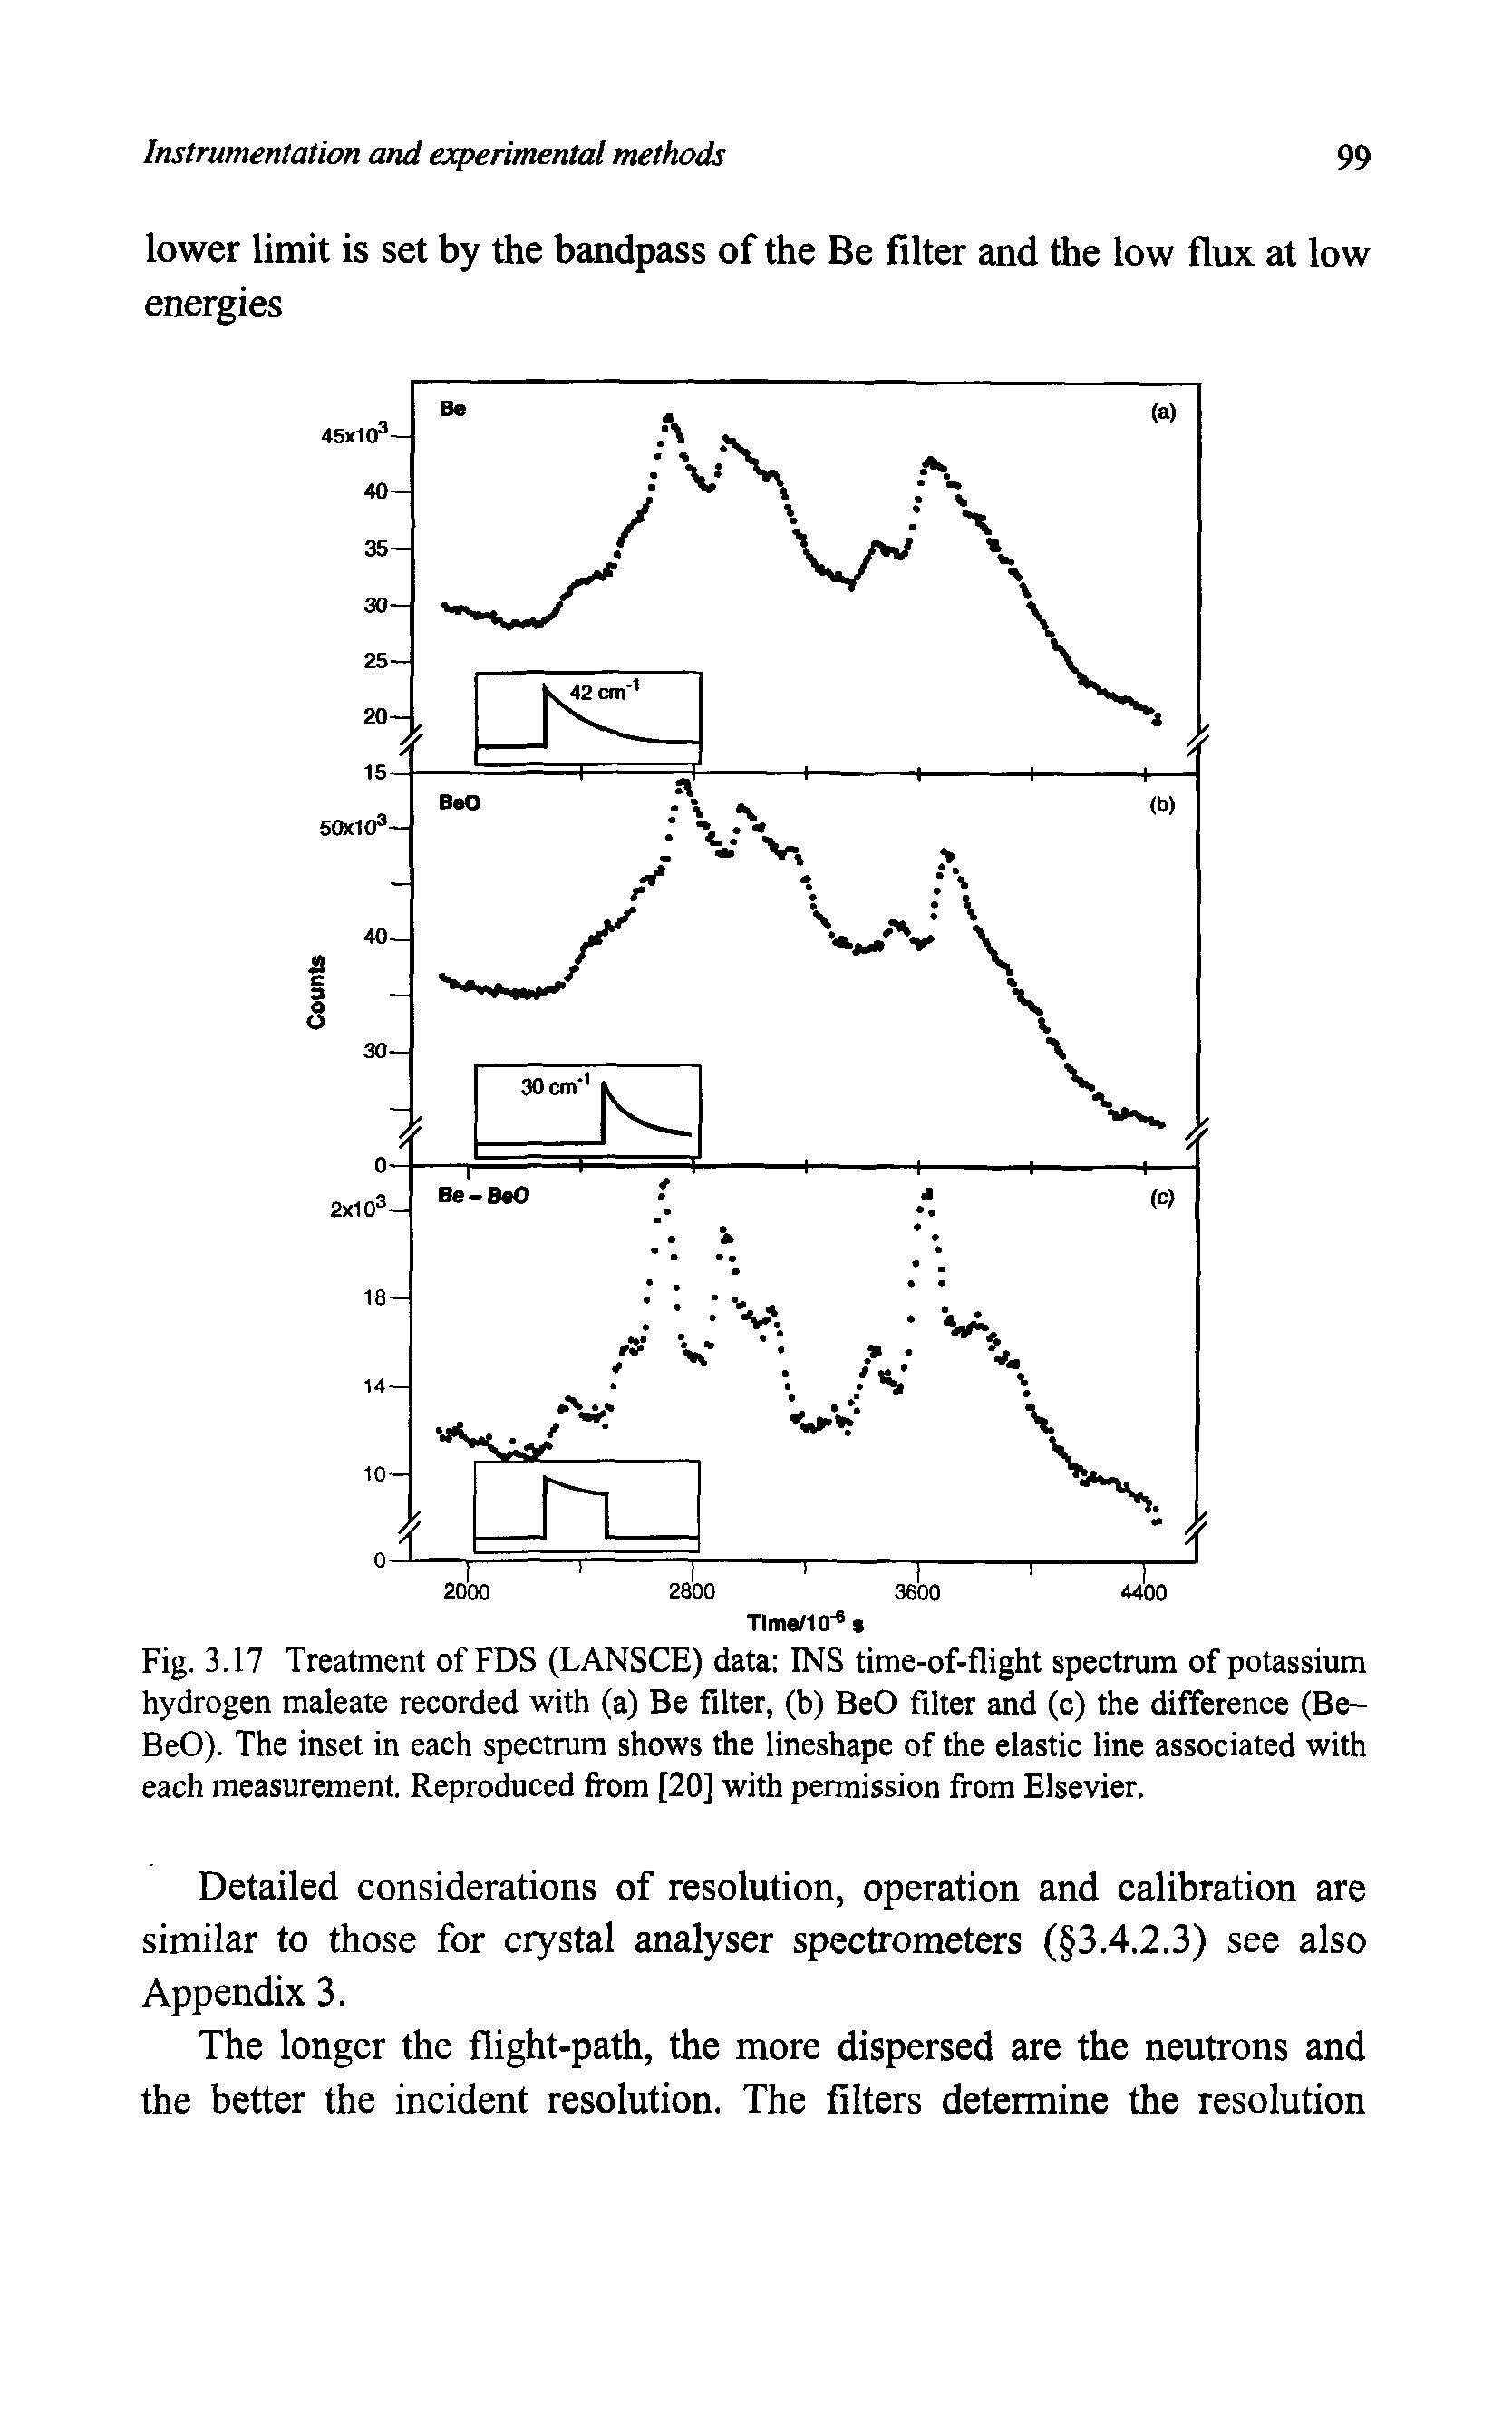 Fig. 3.17 Treatment of FDS (LANSCE) data INS time-of-flight spectrum of potassium hydrogen maleate recorded with (a) Be filter, (b) BeO filter and (c) the difference (Be-BeO). The inset in each spectrum shows the lineshape of the elastic line associated with each measurement. Reproduced from [20] with permission from Elsevier.